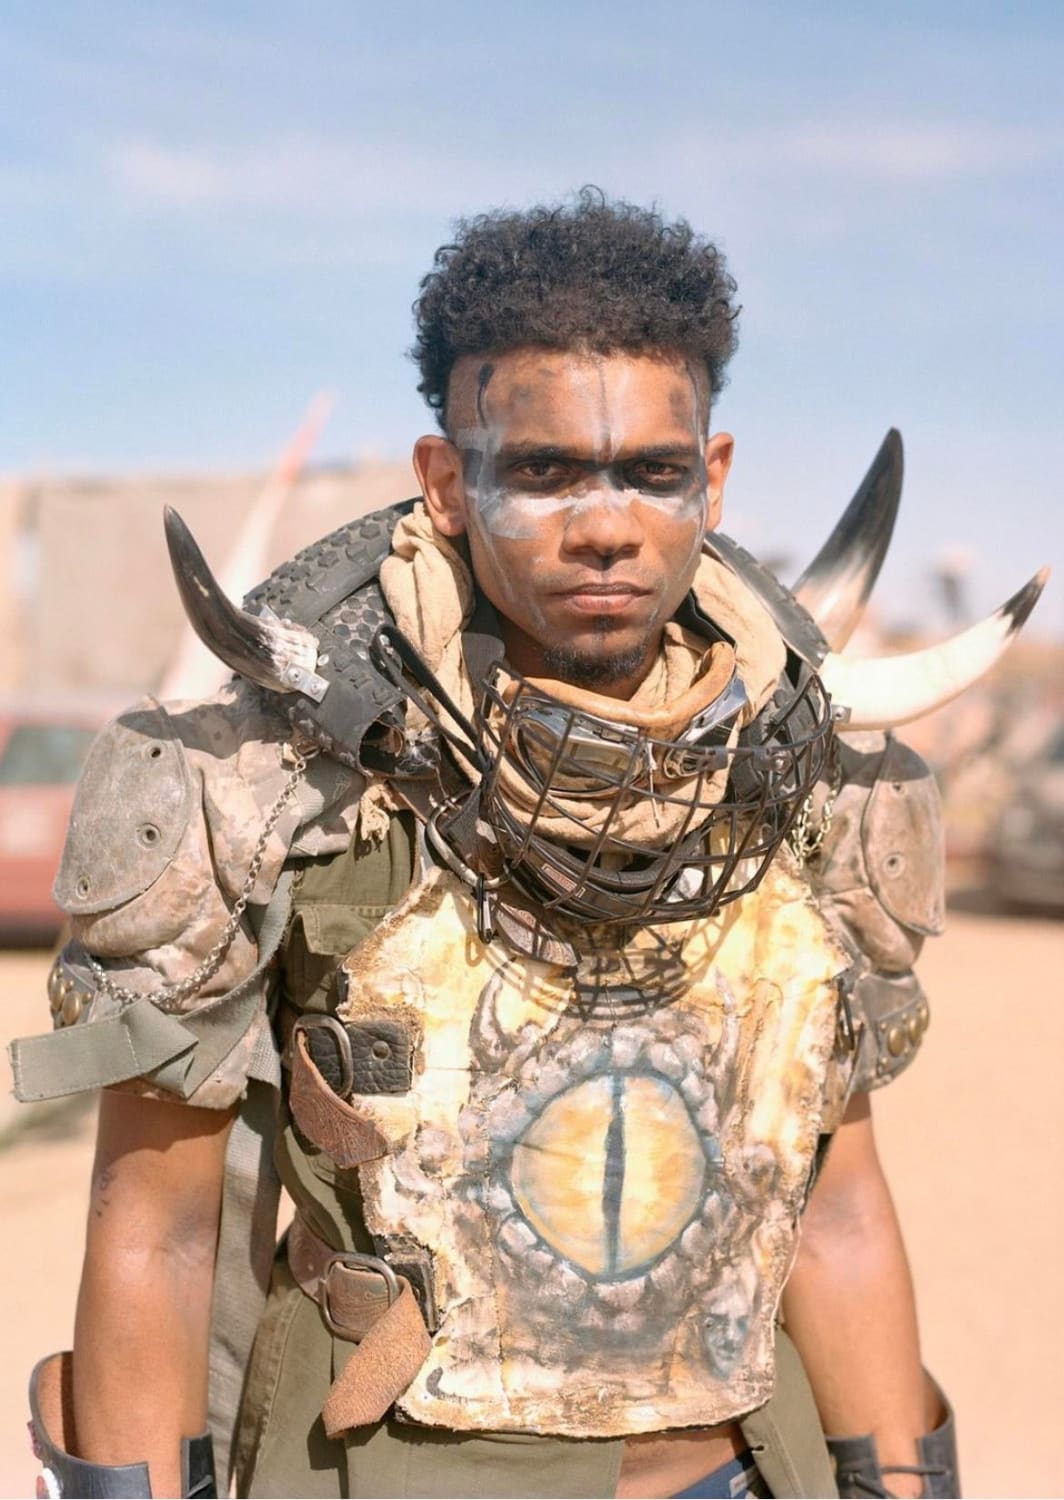 A participant at Wasteland Weekend Festival which tries to recreate the vibe and aesthetics of George Miller’s Mad Max movies, the popular dystopian action flicks every year in California’s Mojave Desert - Photo credit : Joe Pettet-Smith/ "Anarchy Tamed" photo exhibit